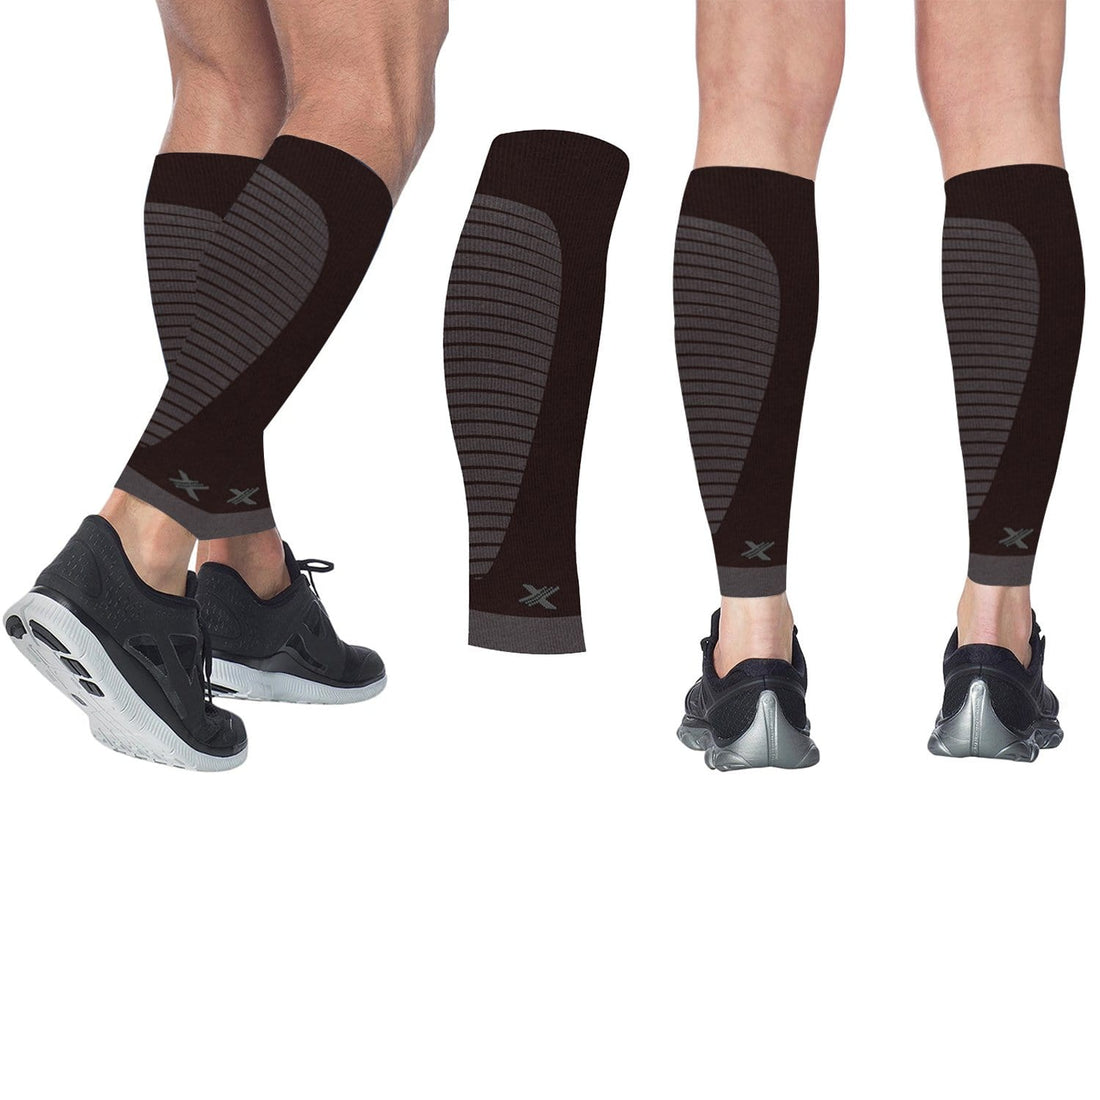 Calf Compression Sleeves – Extreme Fit